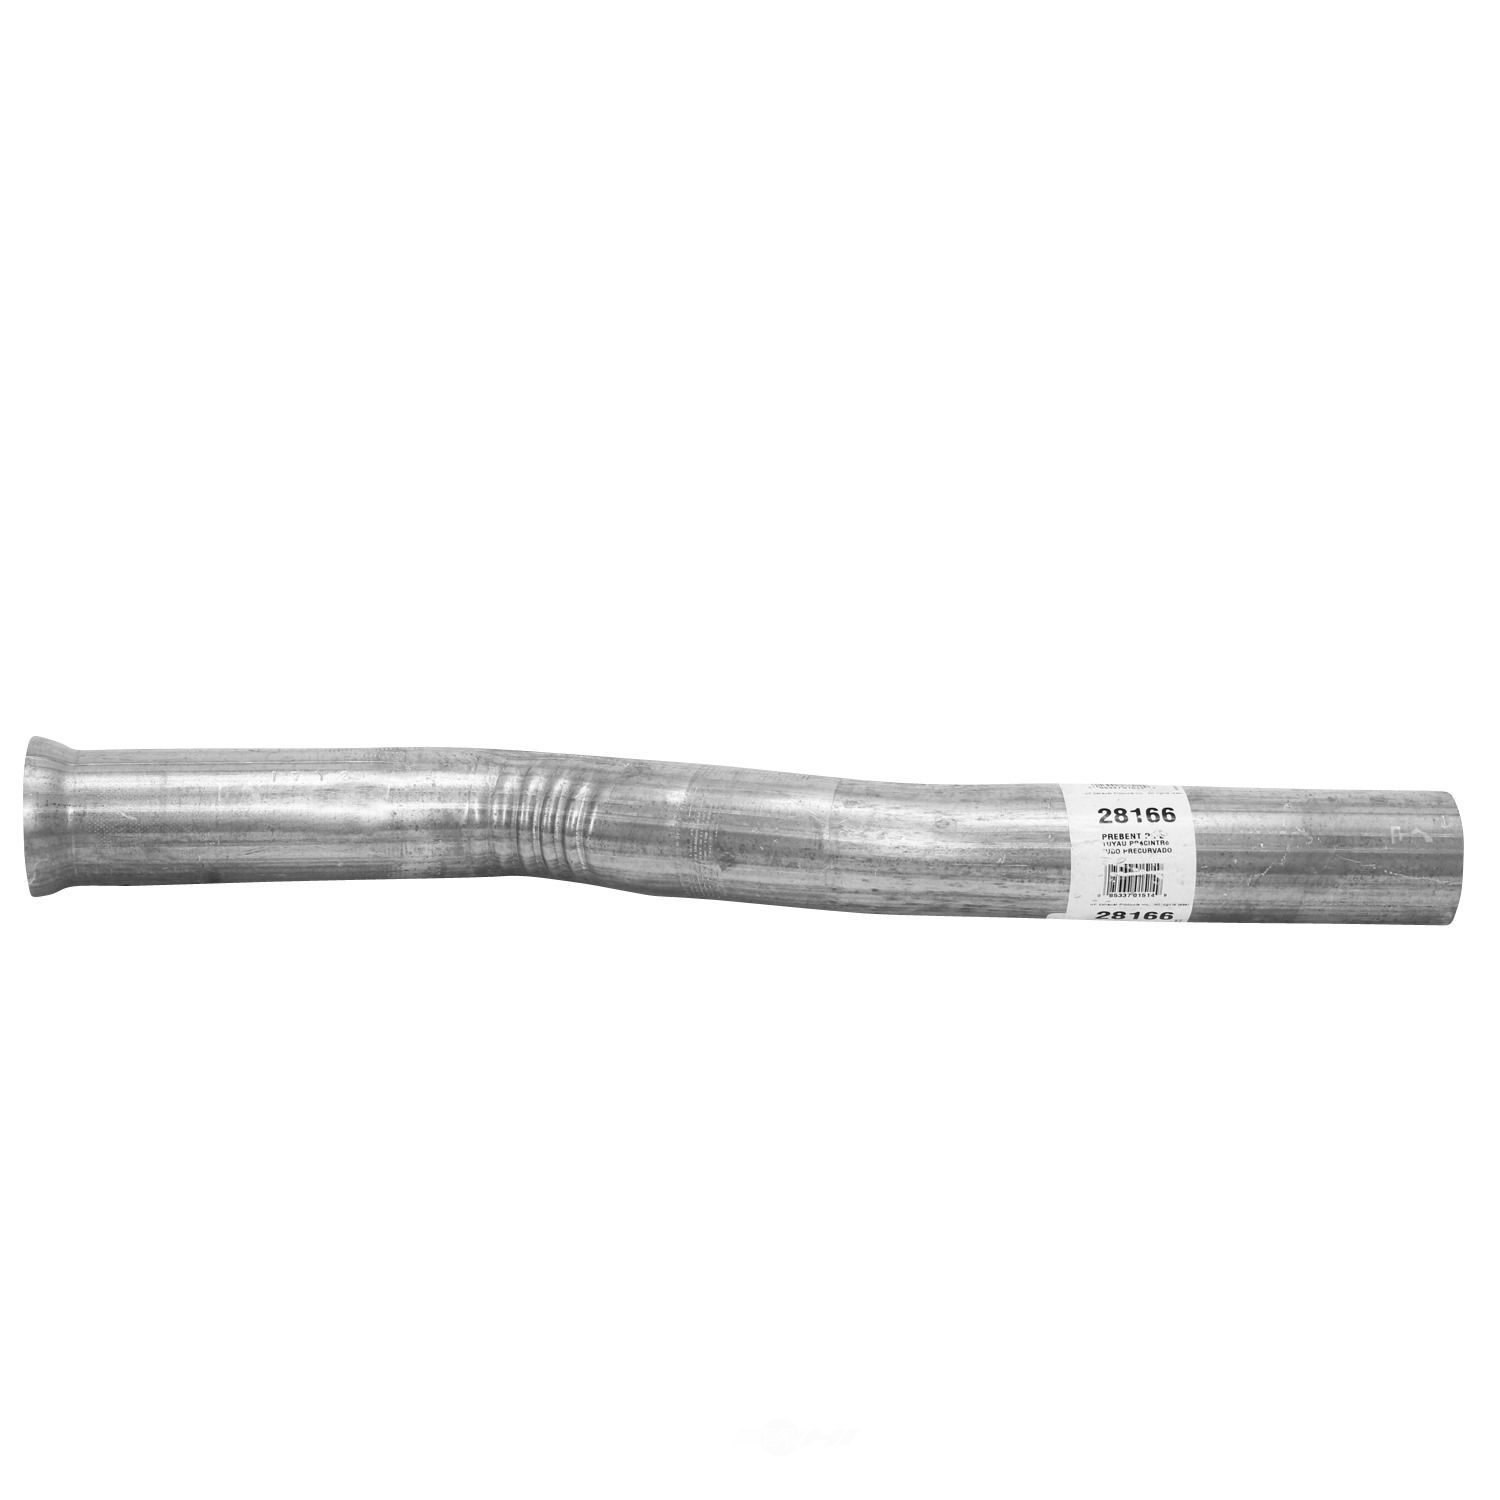 AP EXHAUST W/FEDERAL CONVERTER - Exhaust Pipe - APF 28166